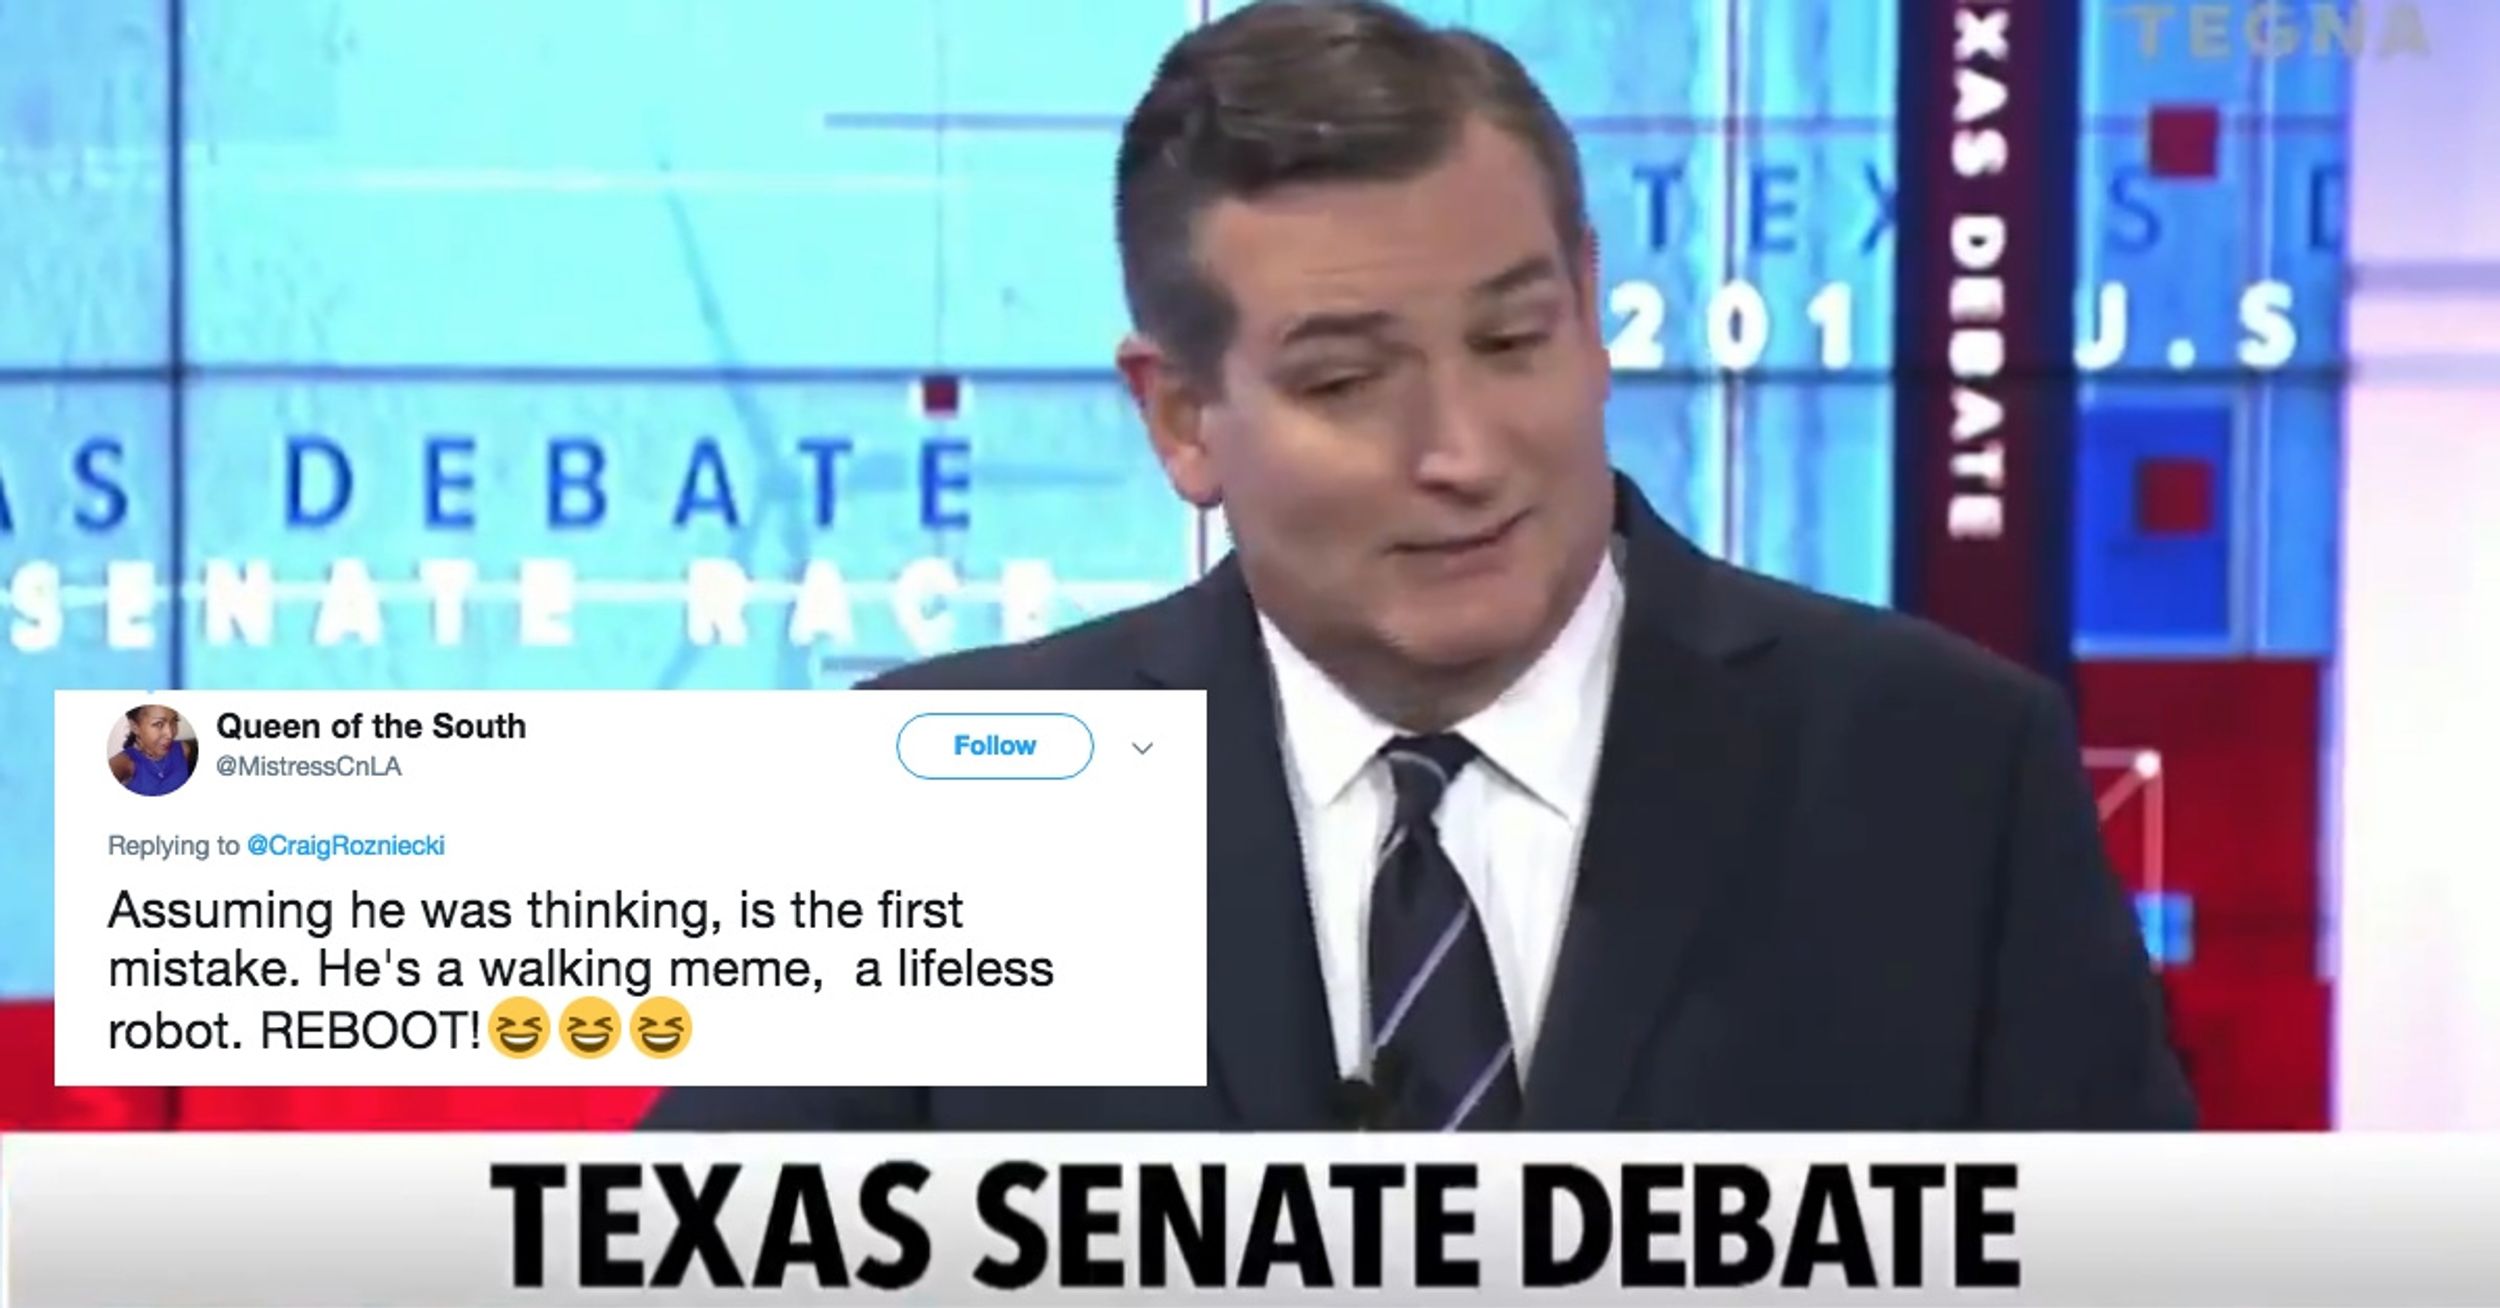 'The Late Show' Took Us Inside Ted Cruz's Head During His Awkwardly Long Debate Pause 😂